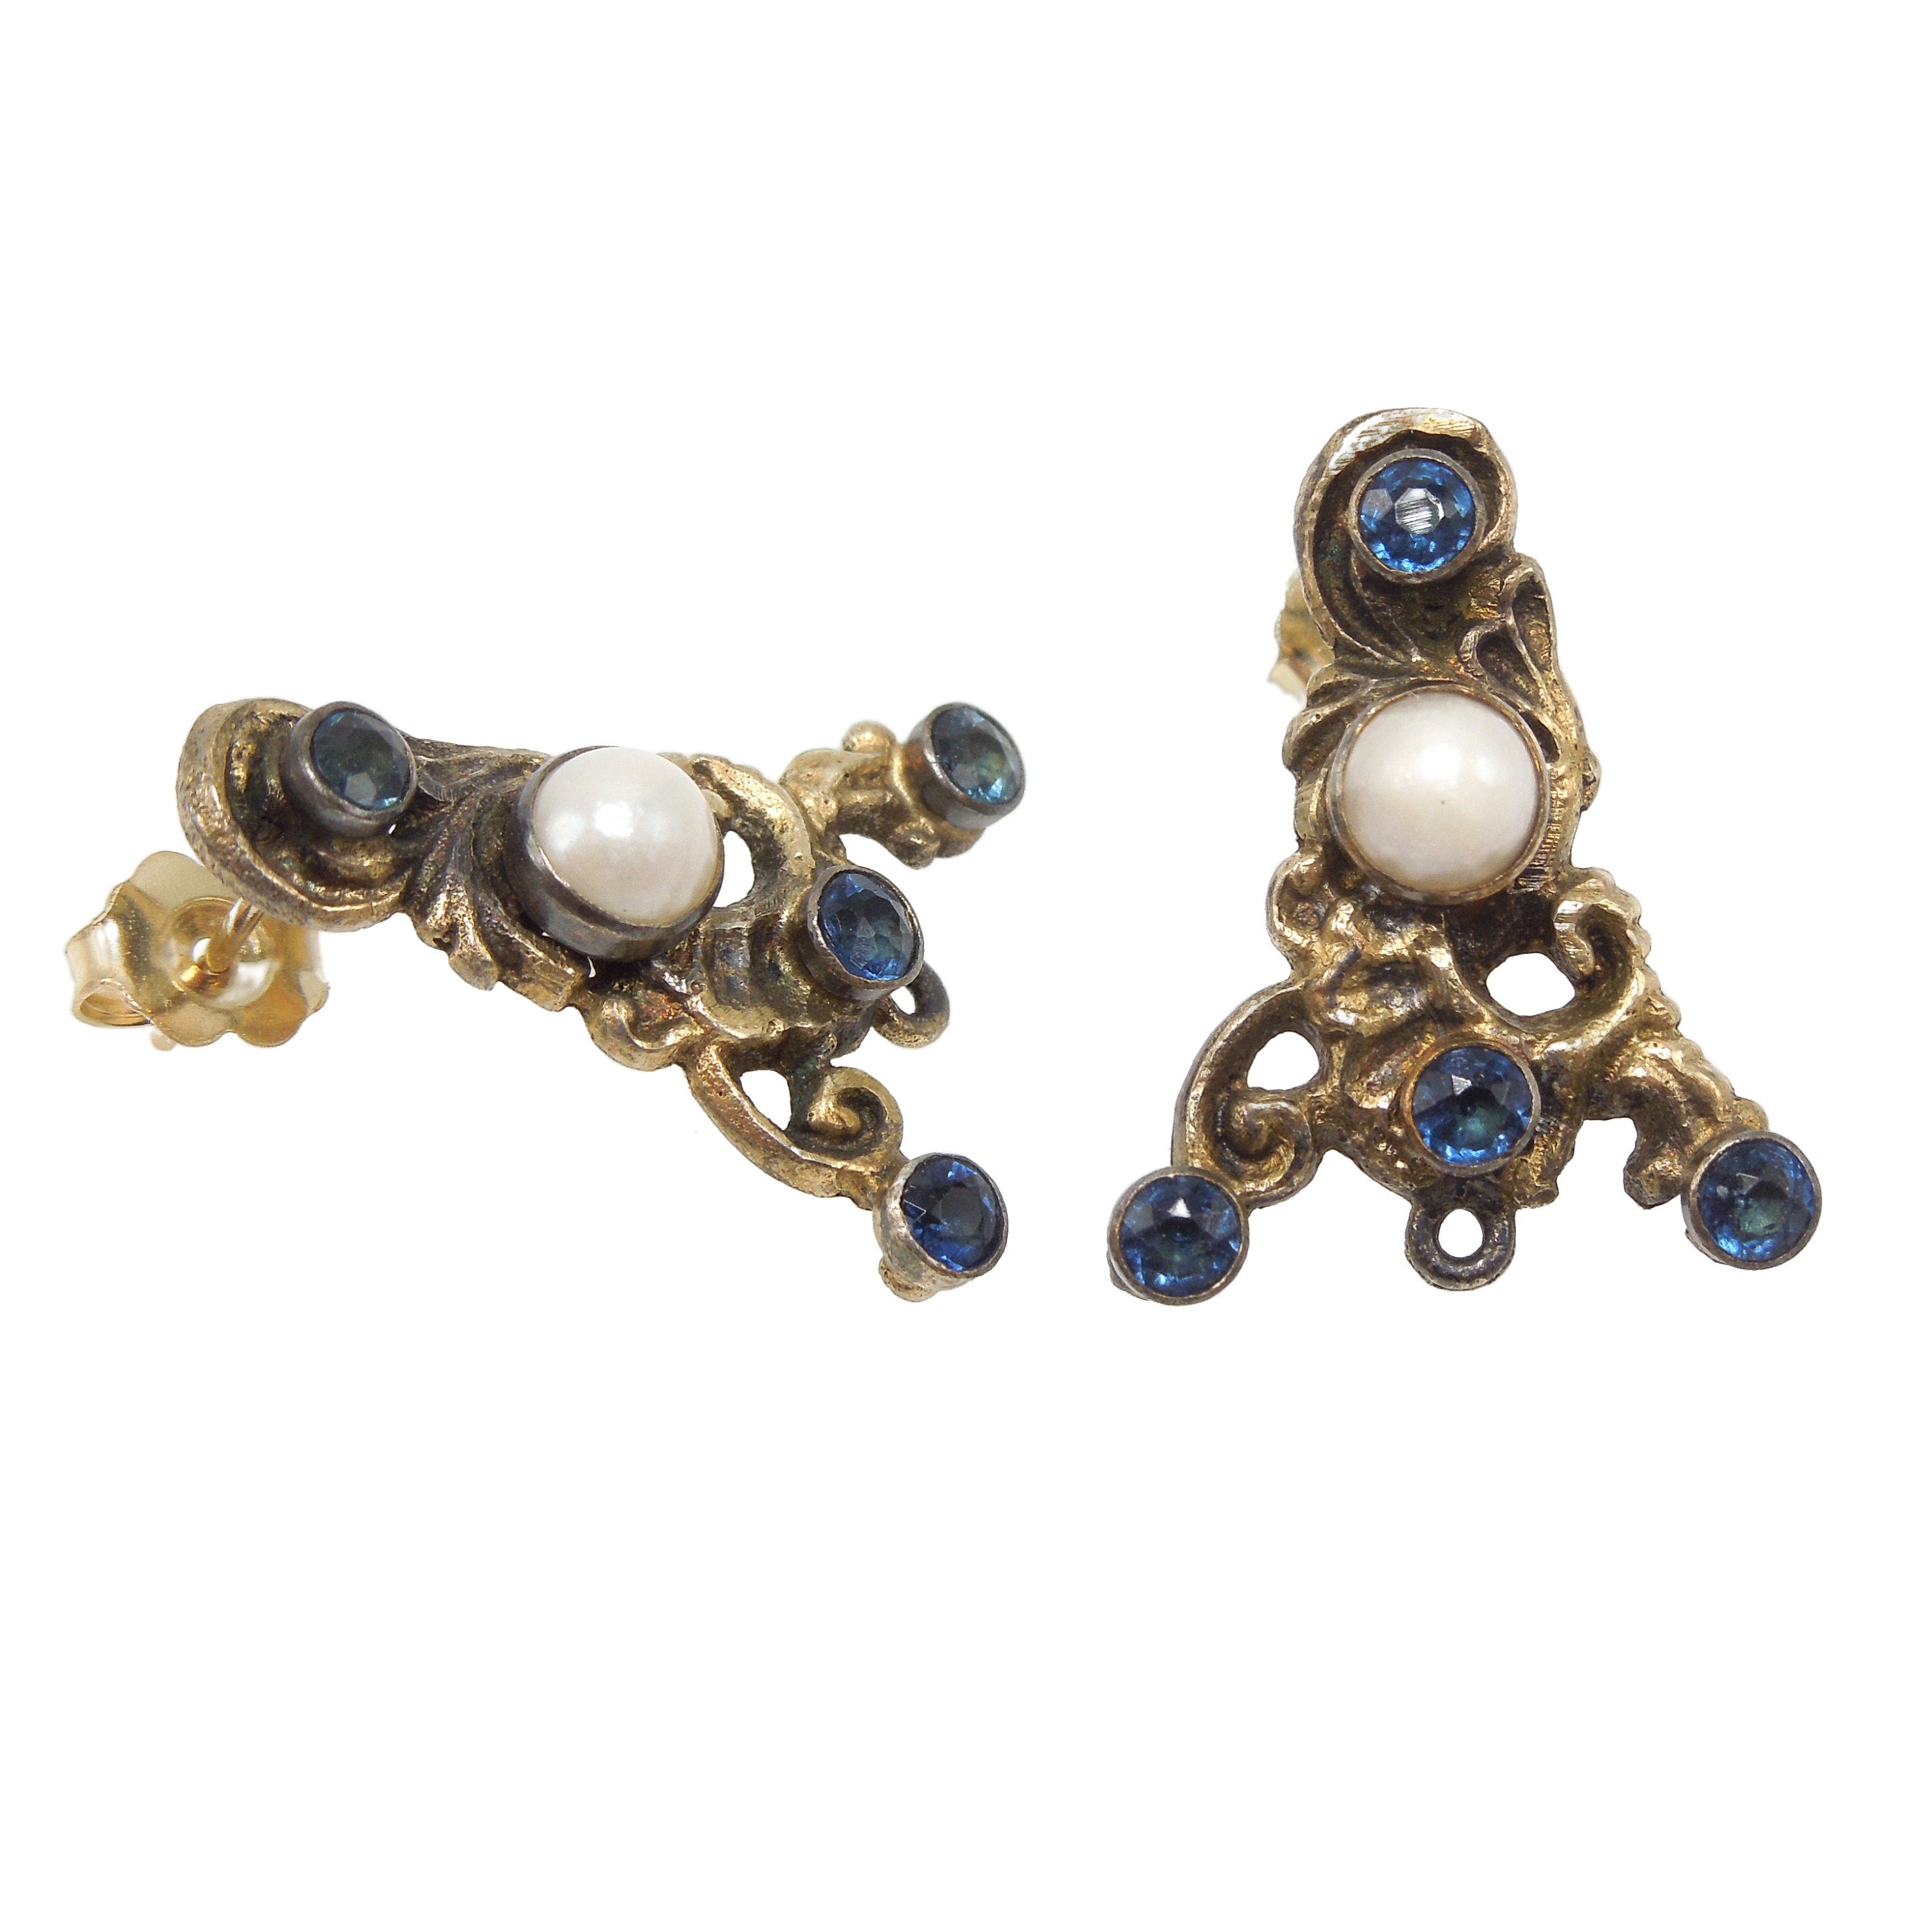 Antique Austro-Hungarian Vermeil Earrings with Sapphires and Pearls